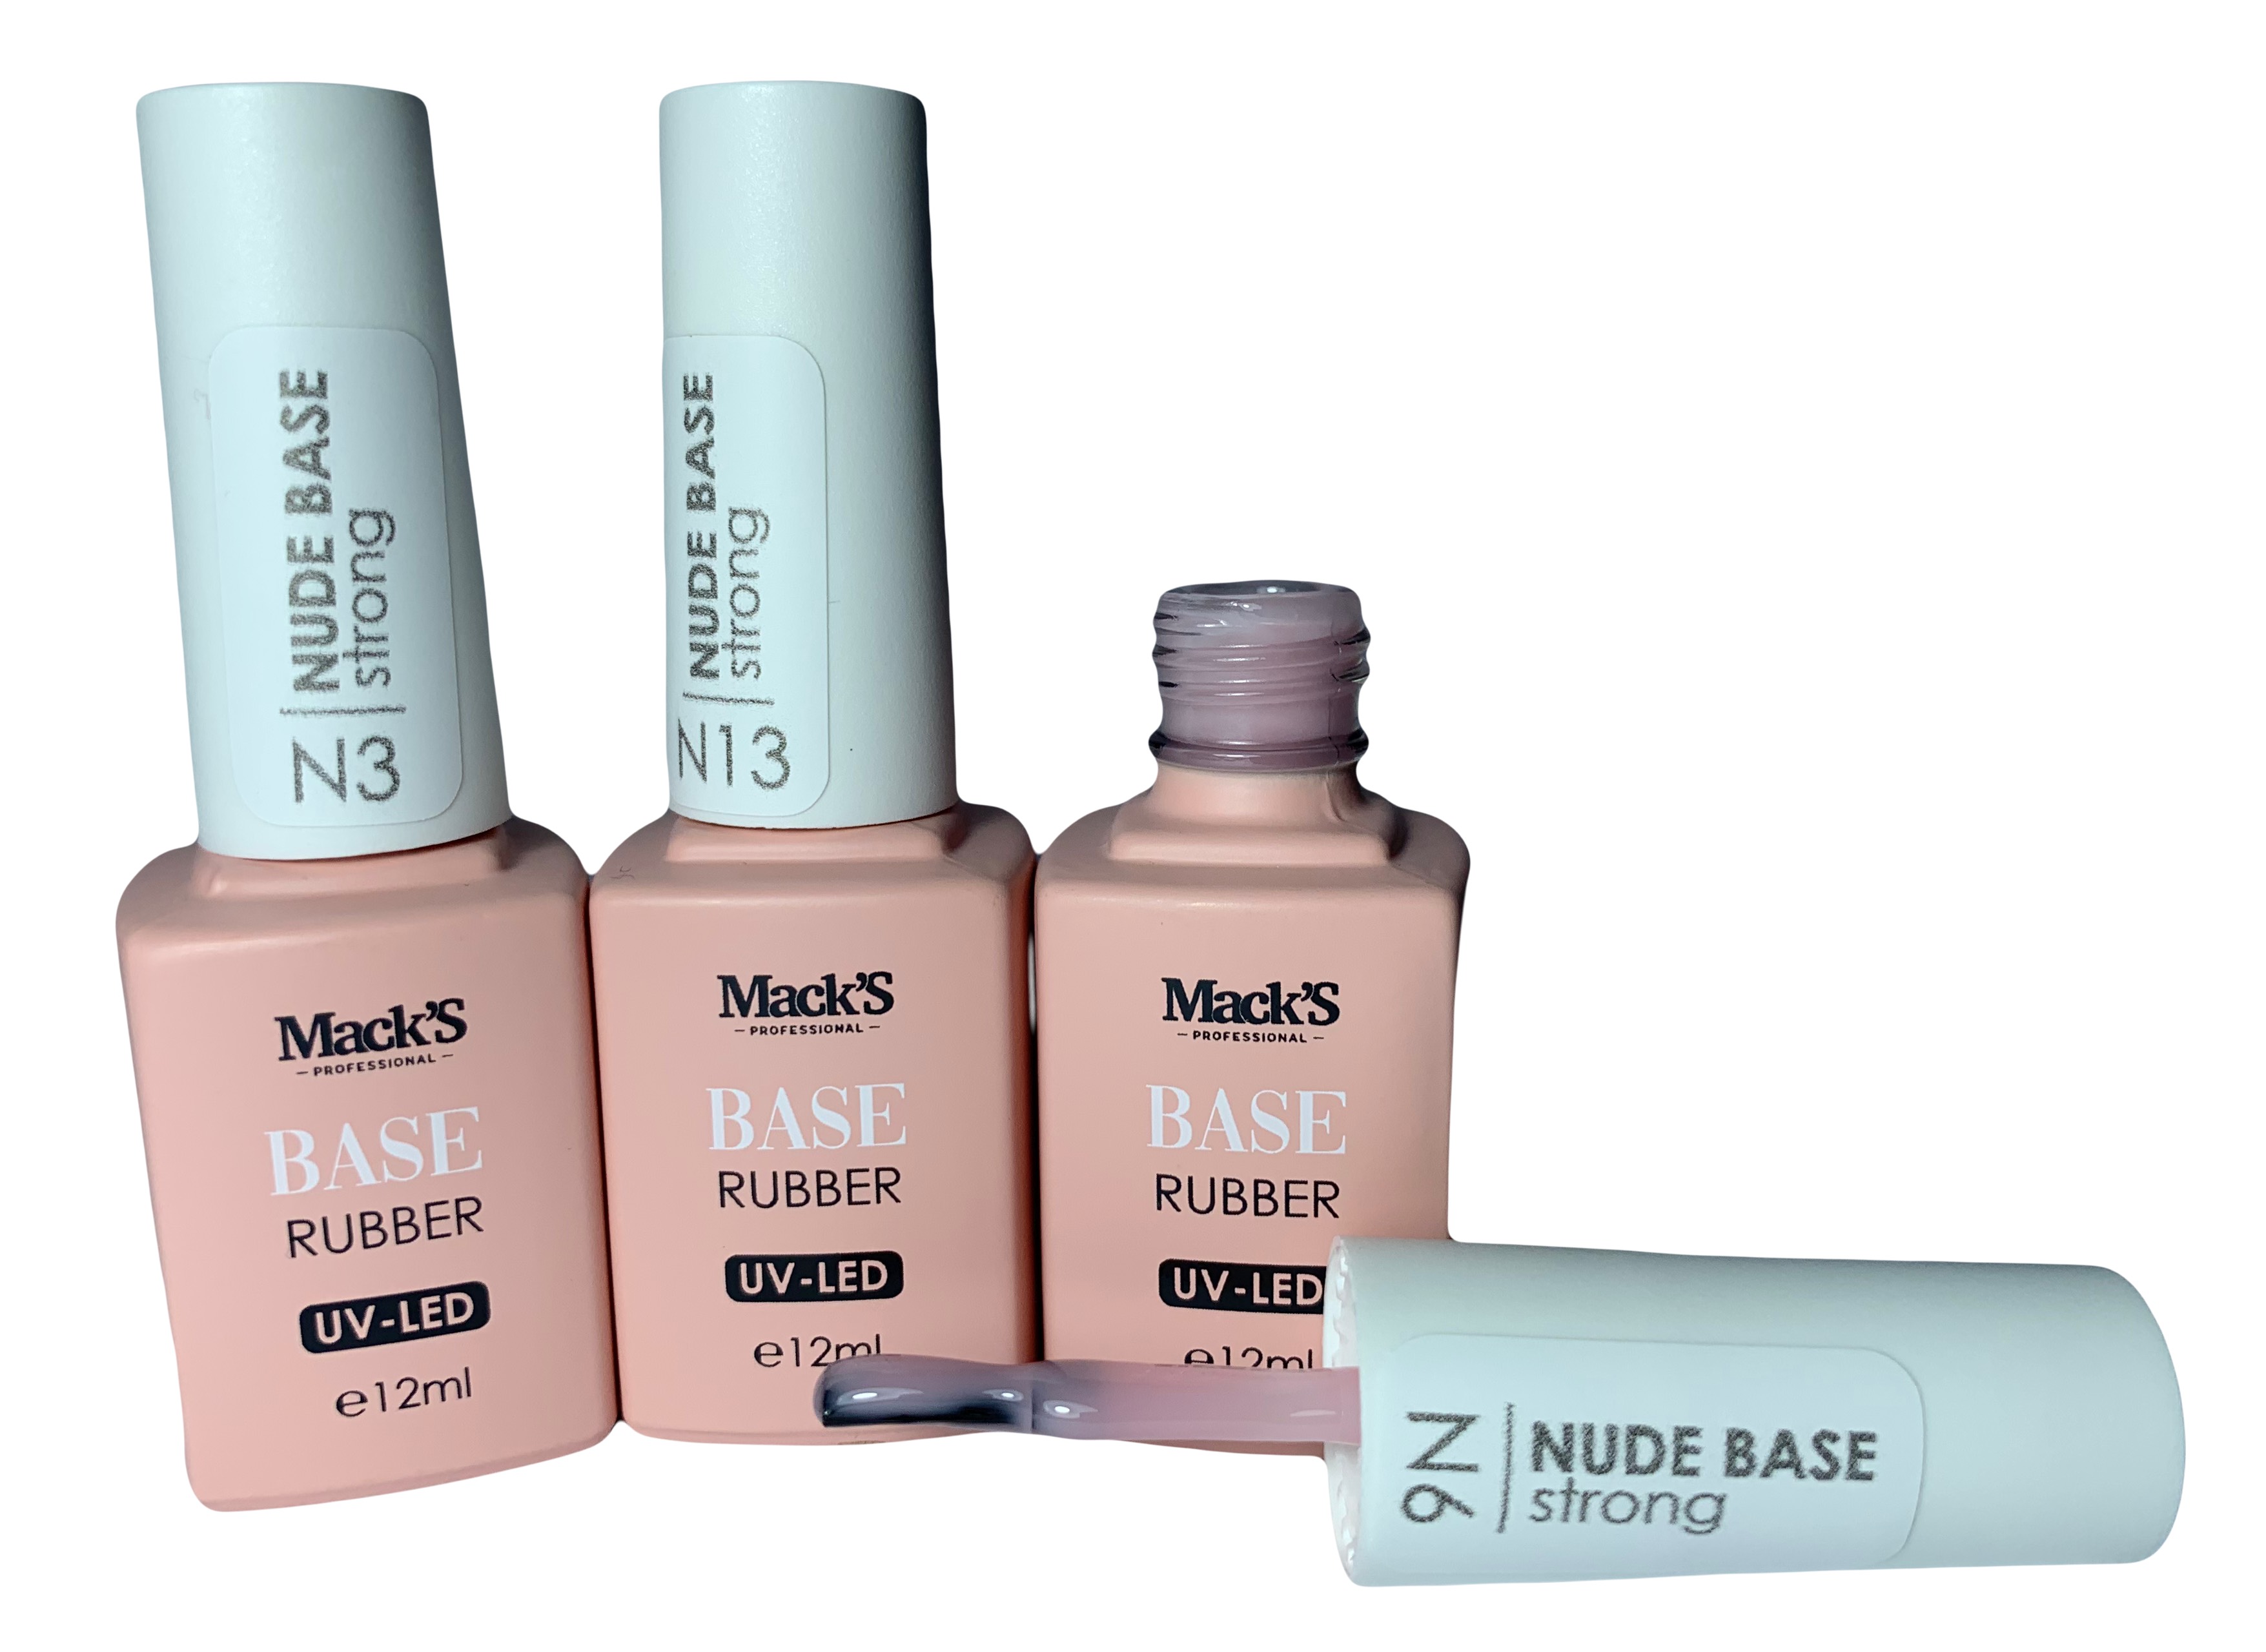 Nude Base Strong